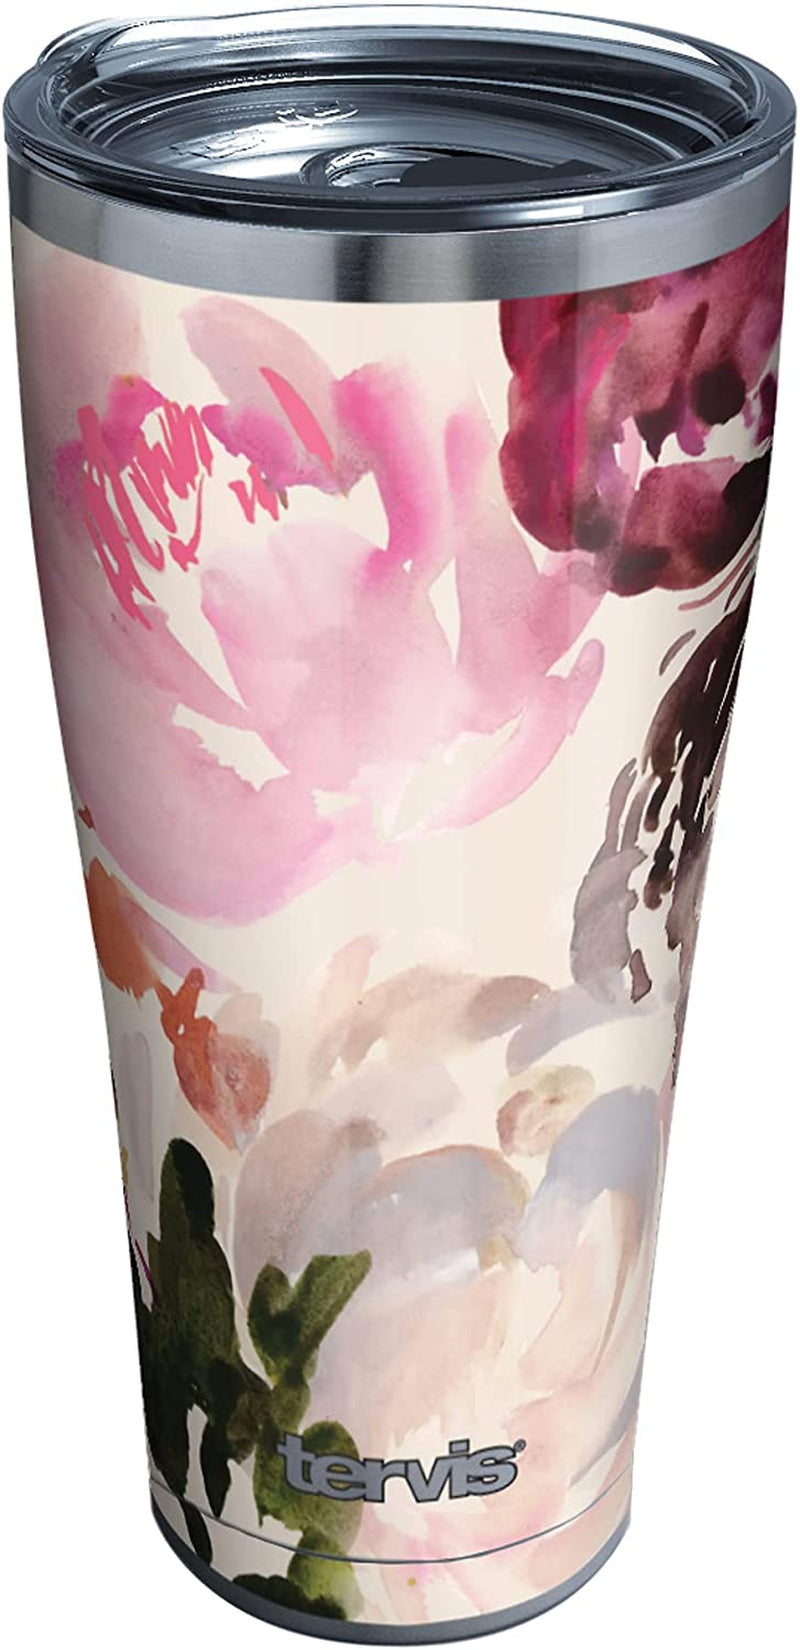 Tervis Made in USA Double Walled Kelly Ventura Floral Collection Insulated Tumbler Cup Keeps Drinks Cold & Hot, 16Oz 4Pk - Classic, Assorted Home & Garden > Kitchen & Dining > Tableware > Drinkware Tervis Posy 30oz - Stainless Steel 